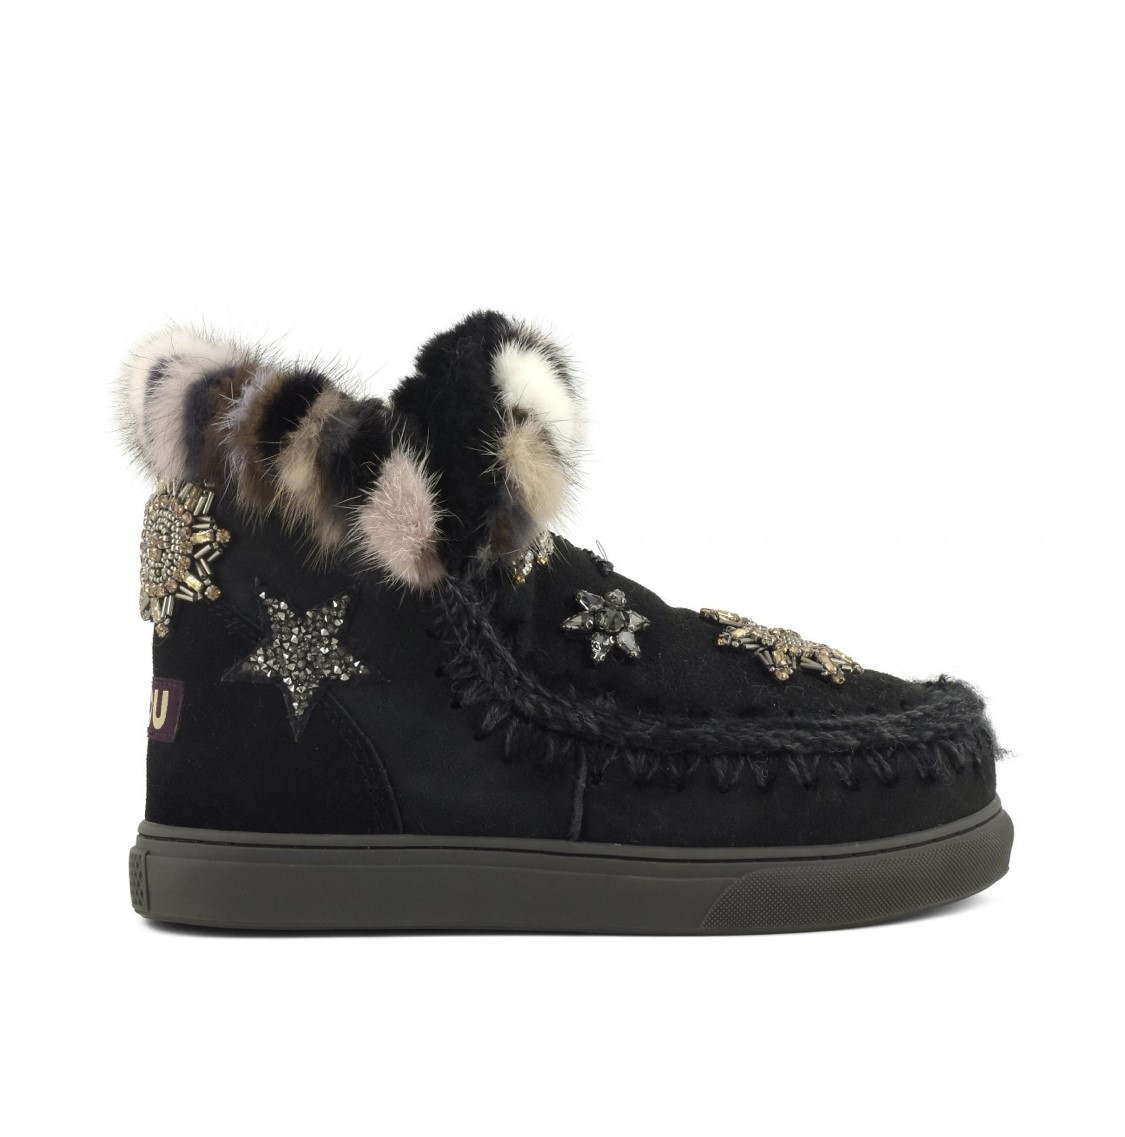 Mou sneaker star patches & mink